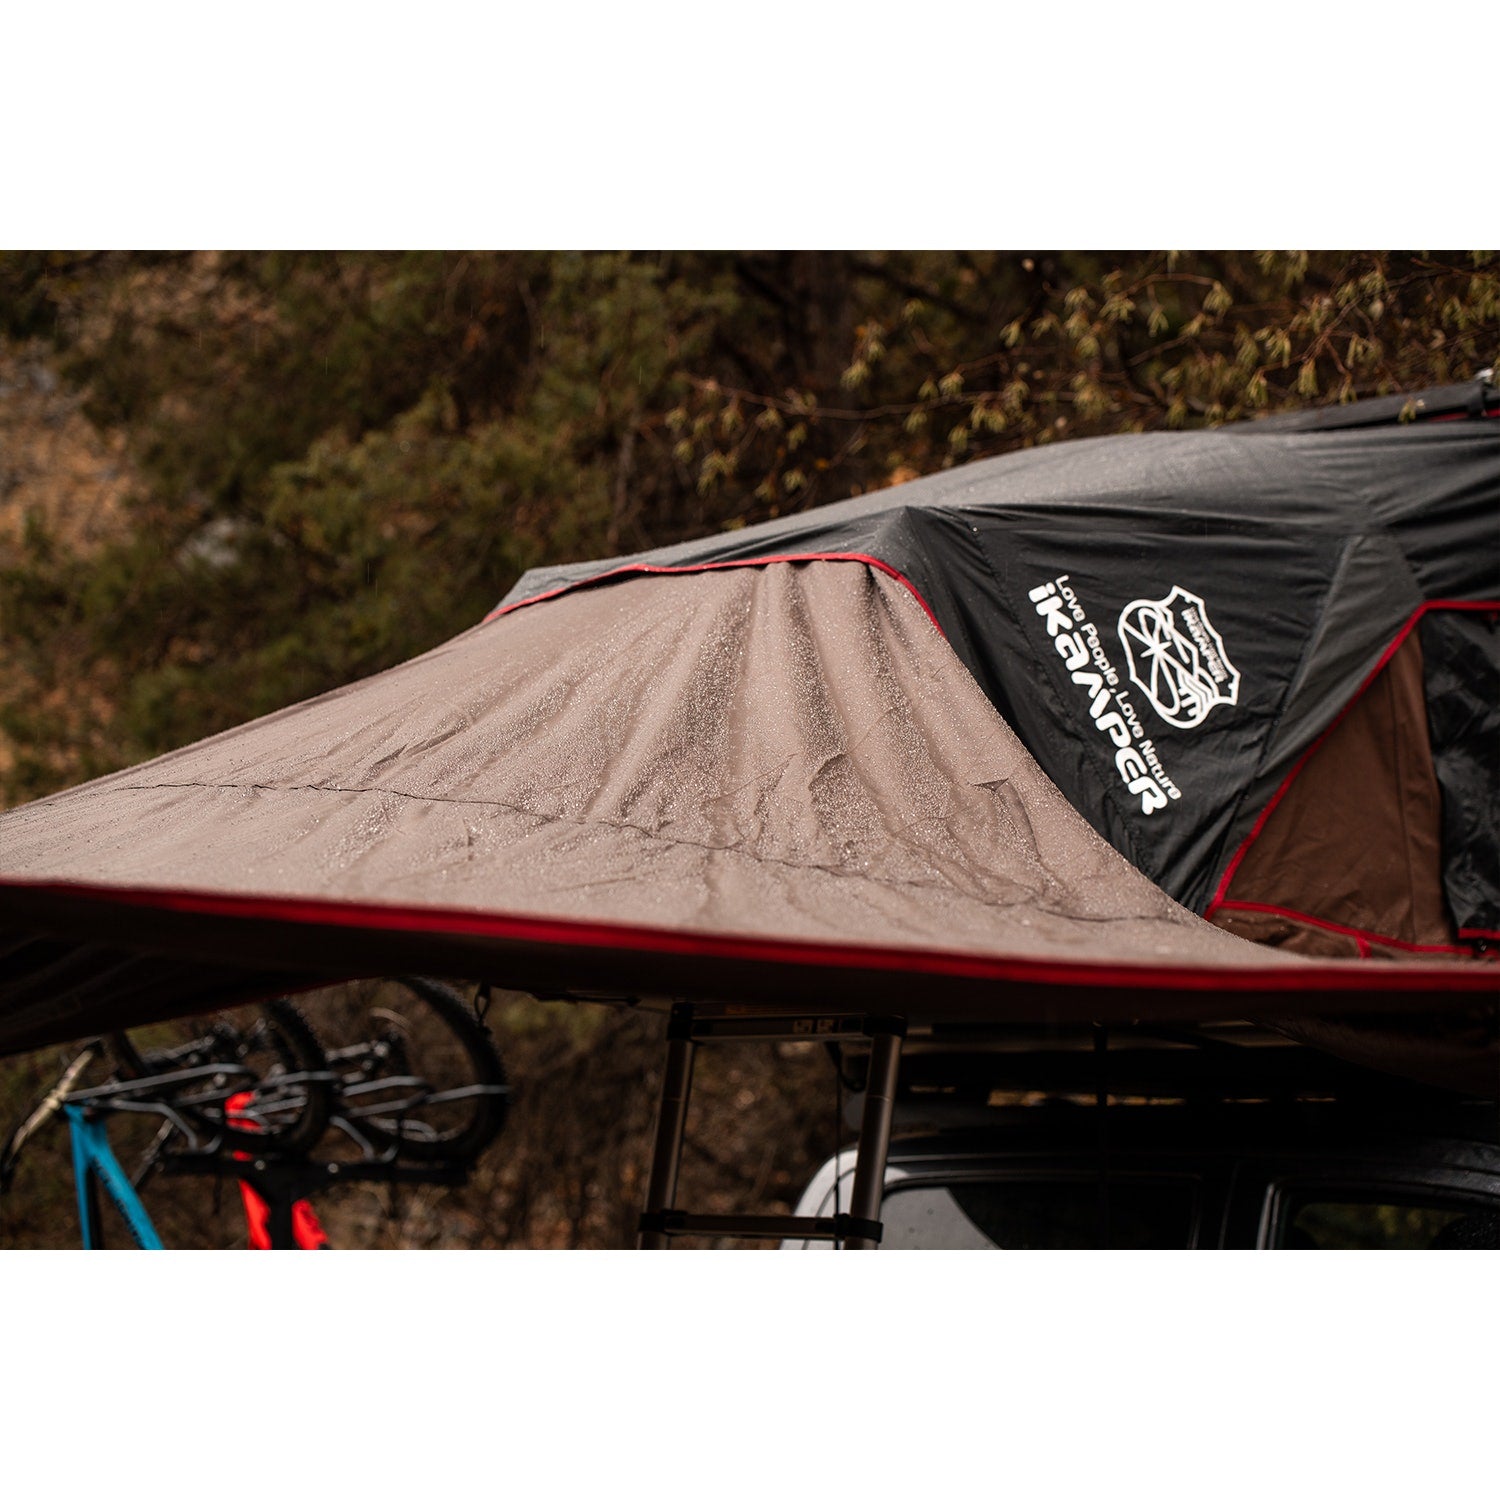 iKamper Camp Awning | Awnings for Roof Top Tents